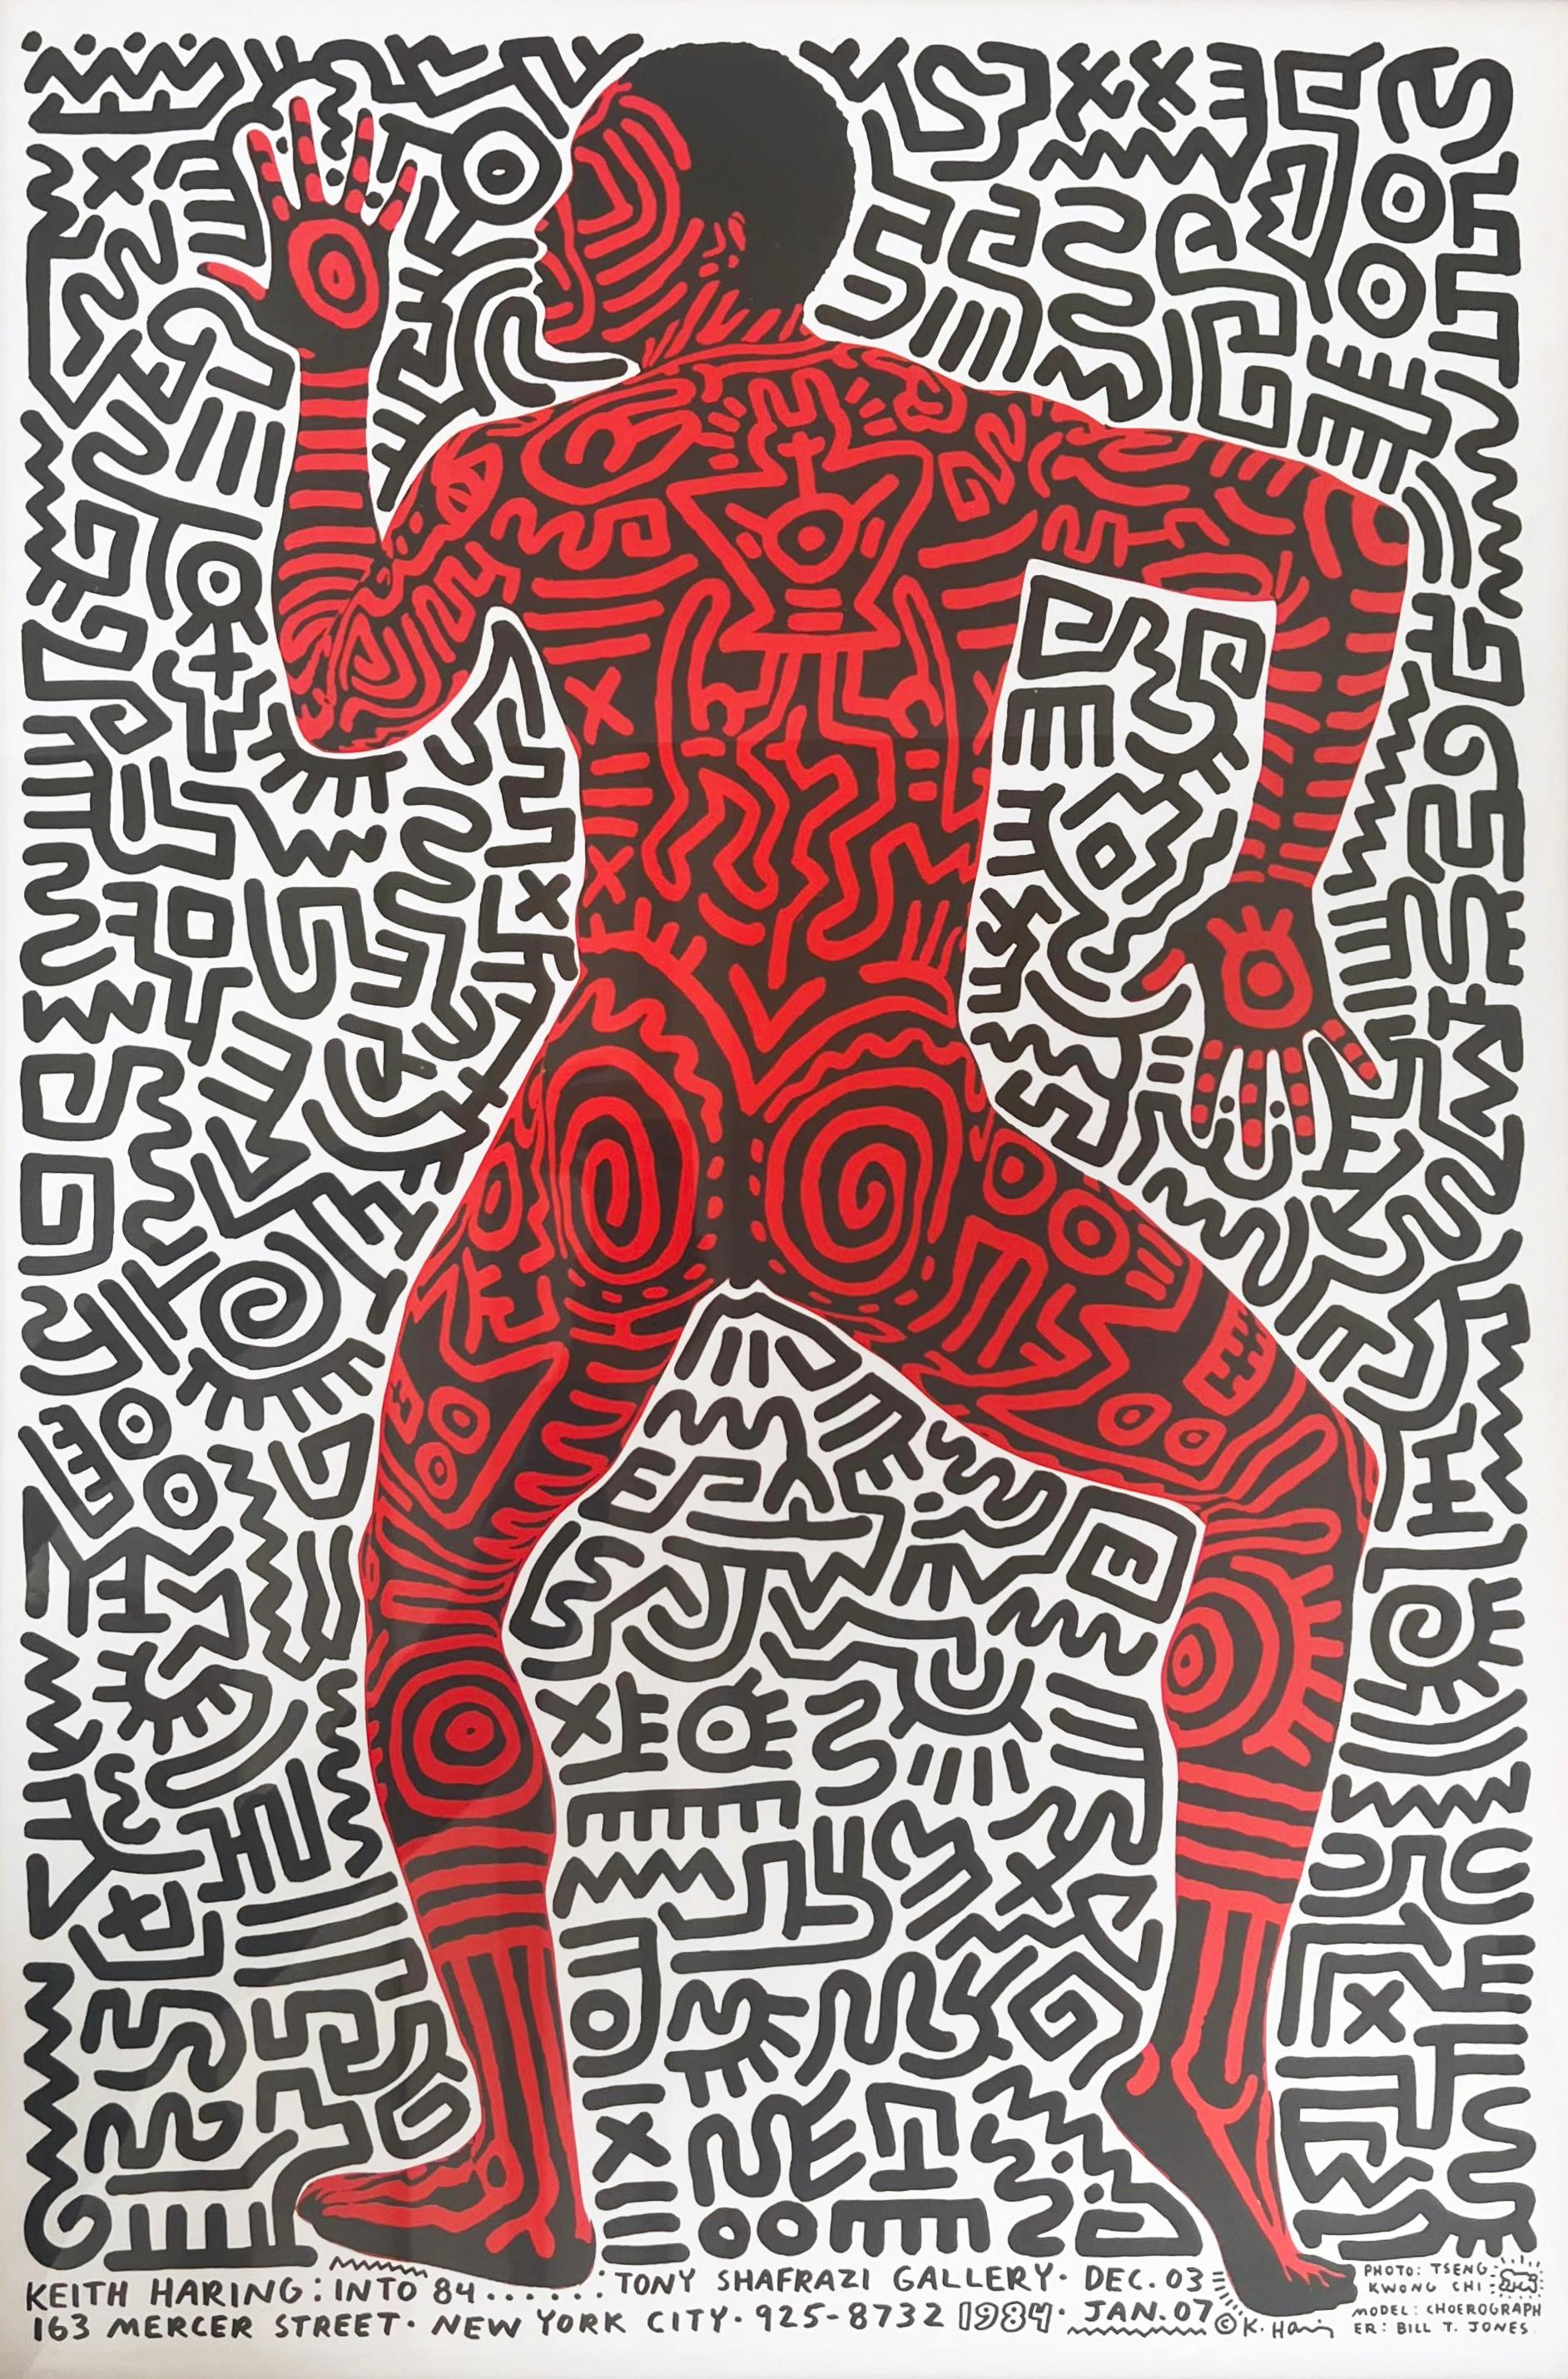 Affiche Keith Haring Into 84 (vintage Keith Haring)  1